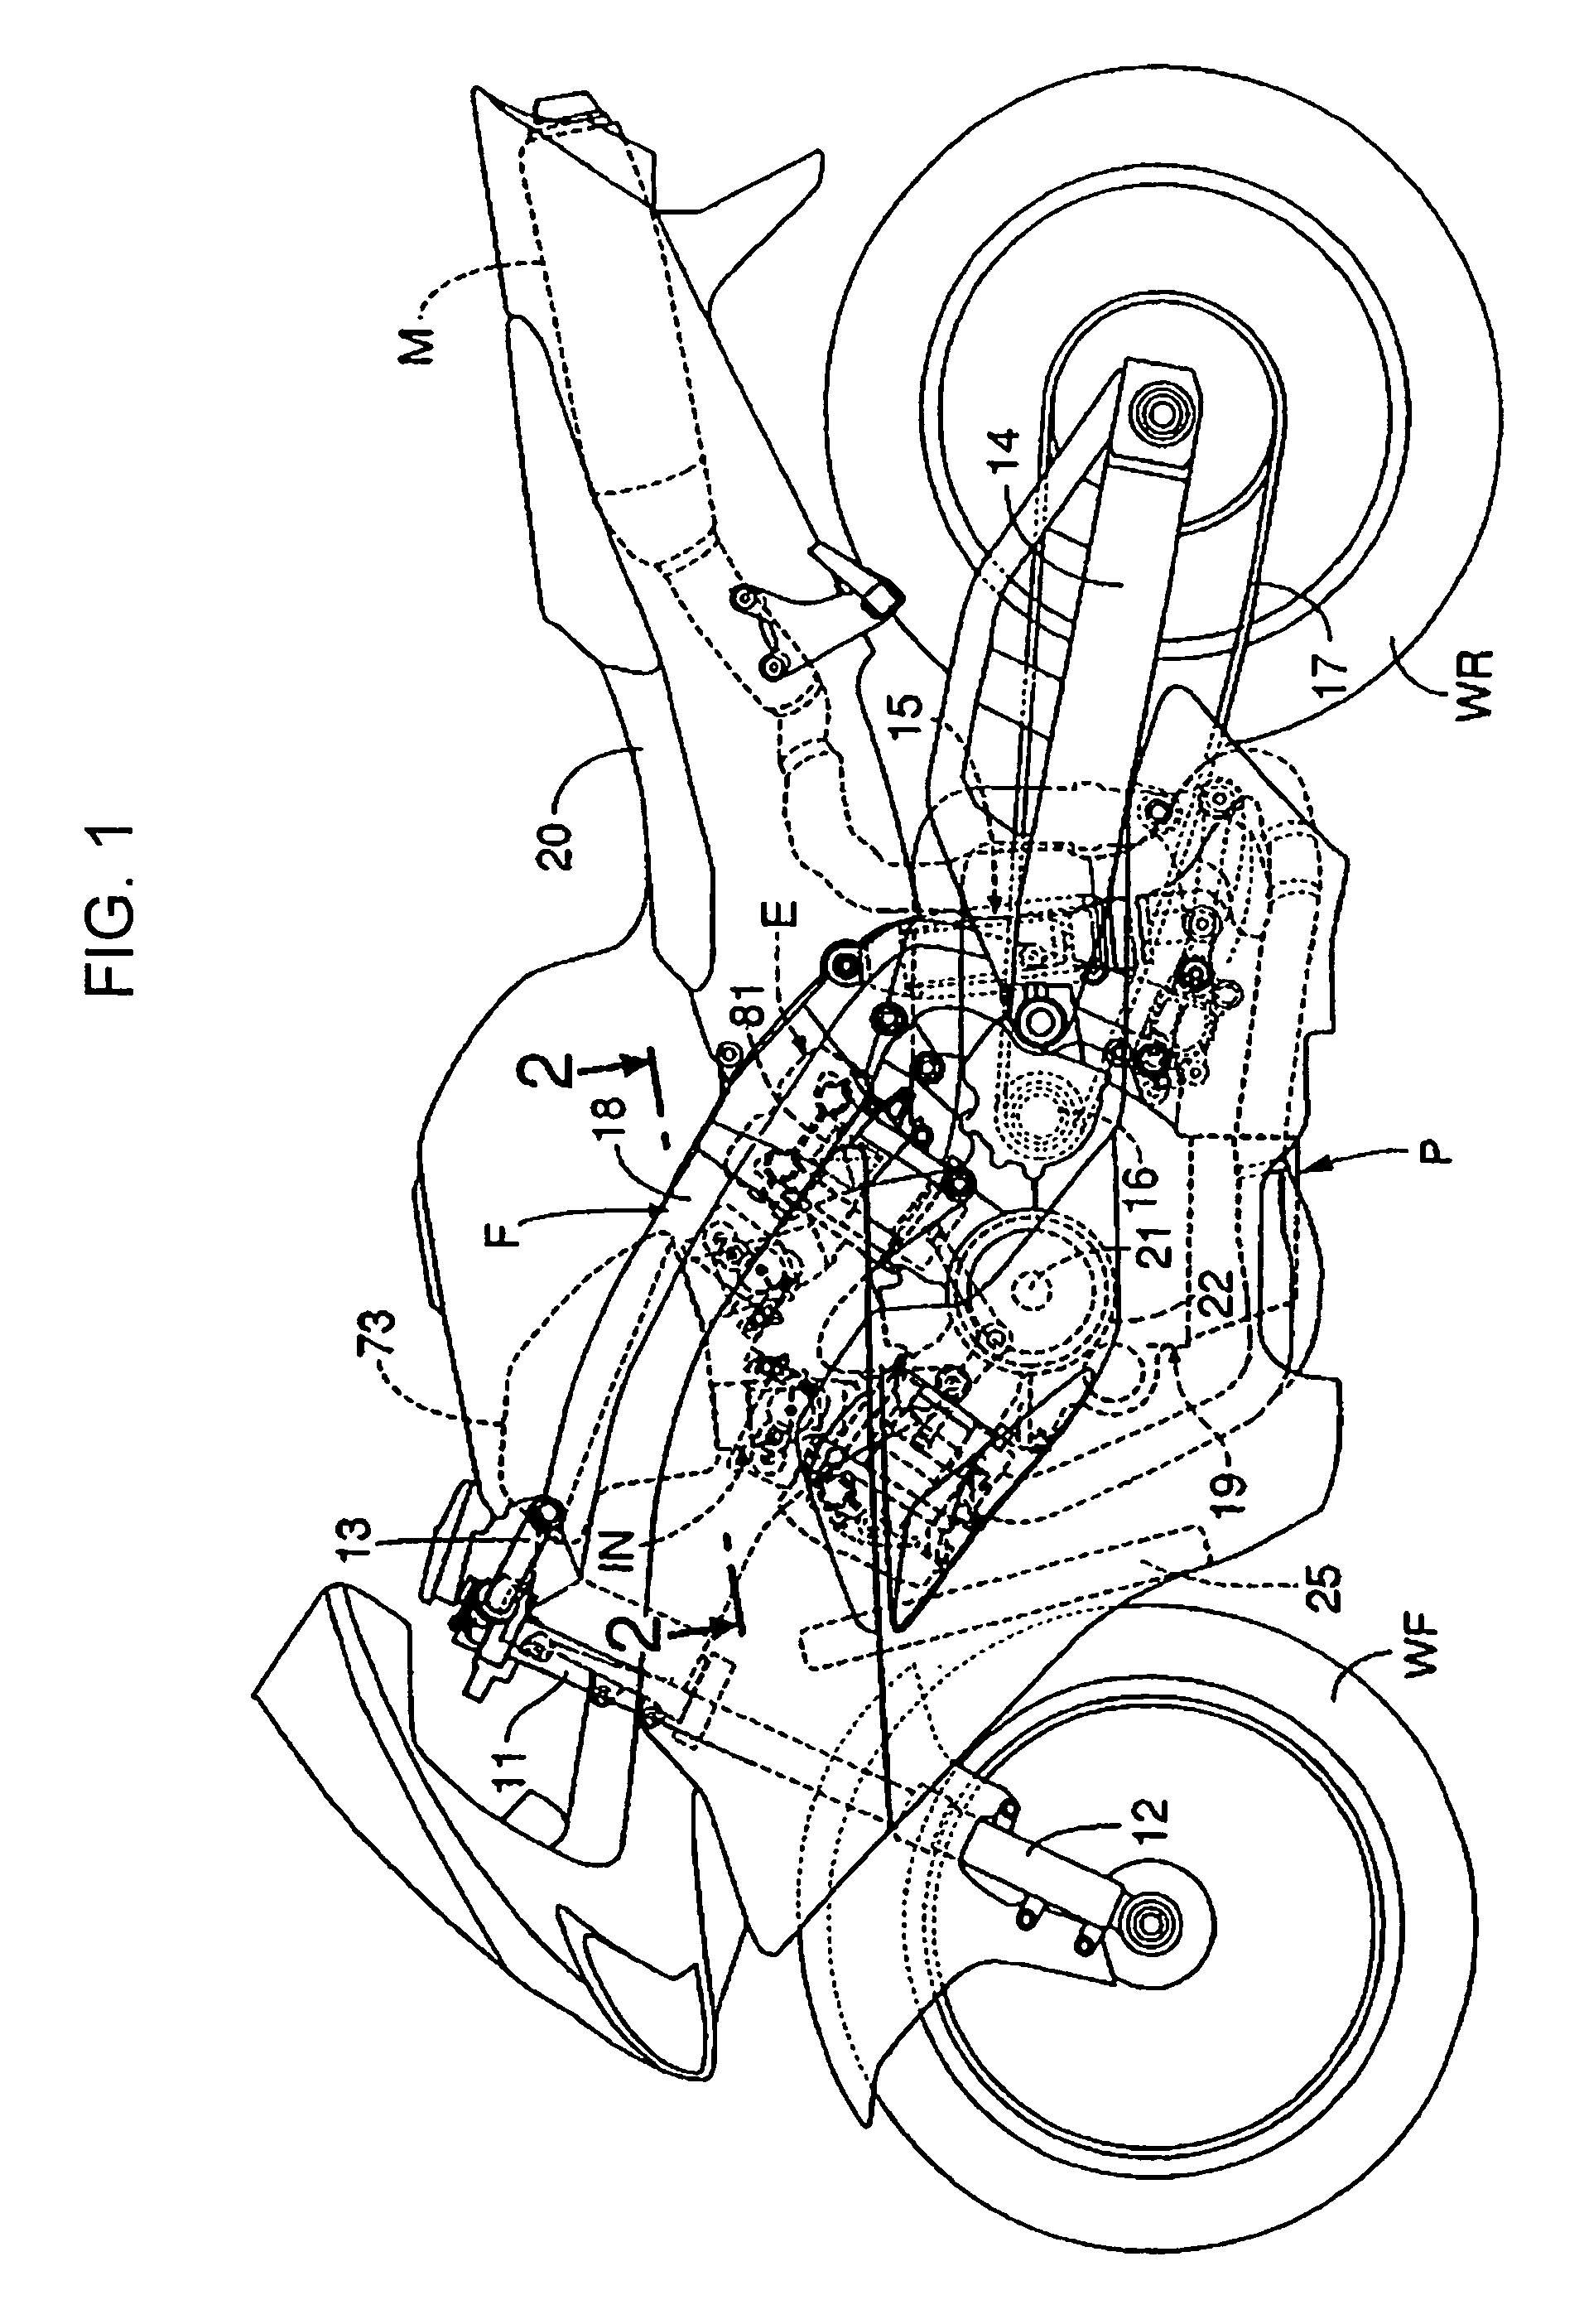 V-type engine and motorcycle incorporating same